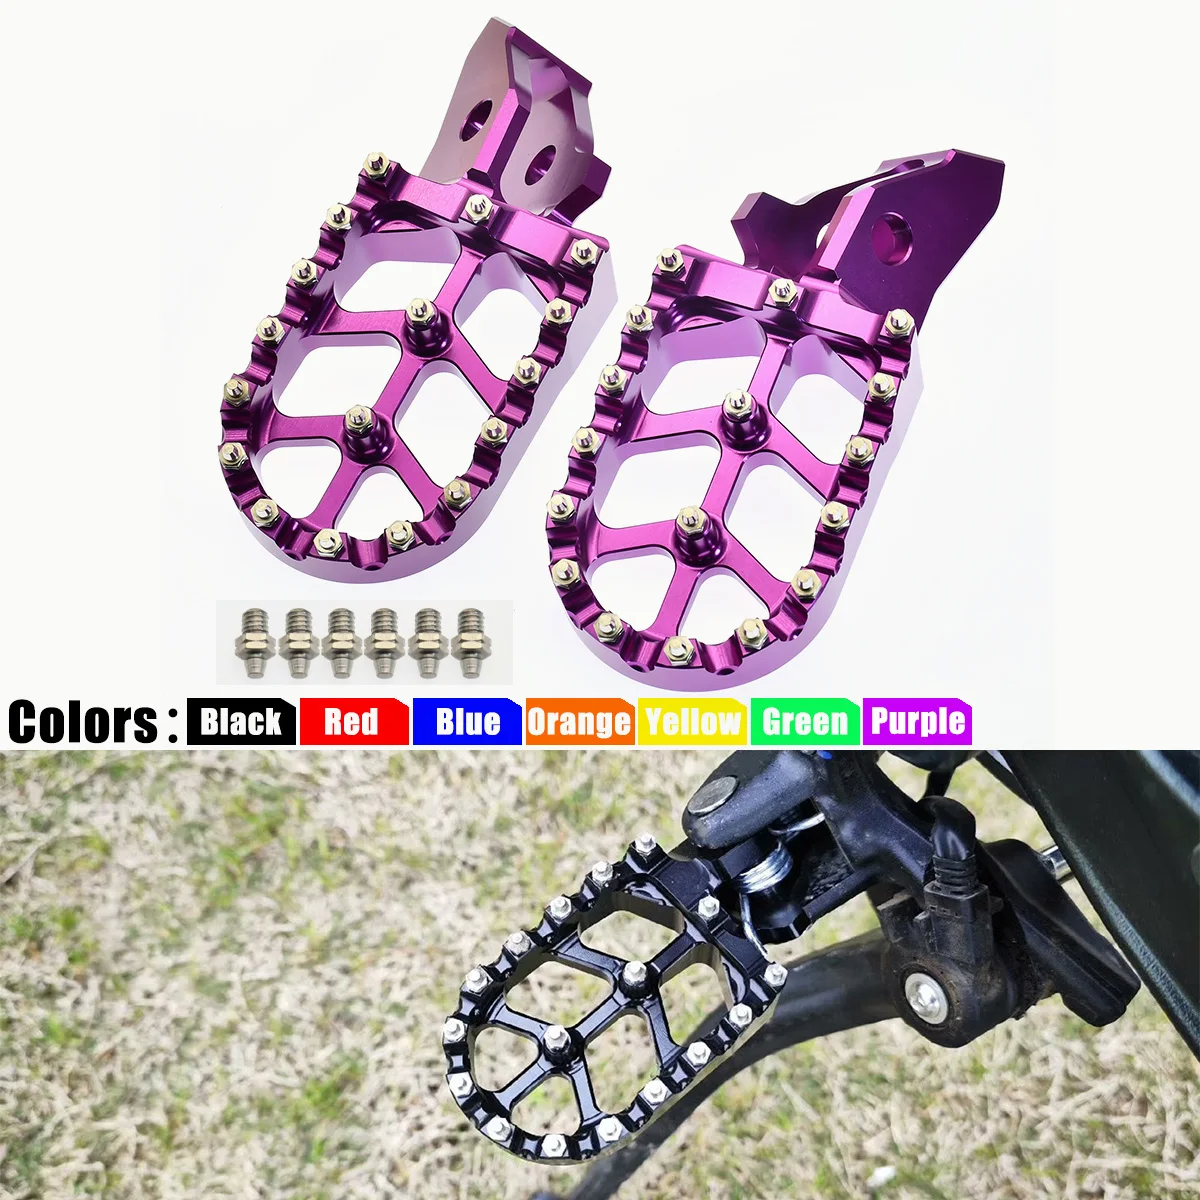 Motorcycle Footpeg Footpedal Footrest Foot Pegs For Ultrabee Surron Sur-Ron - $52.32+